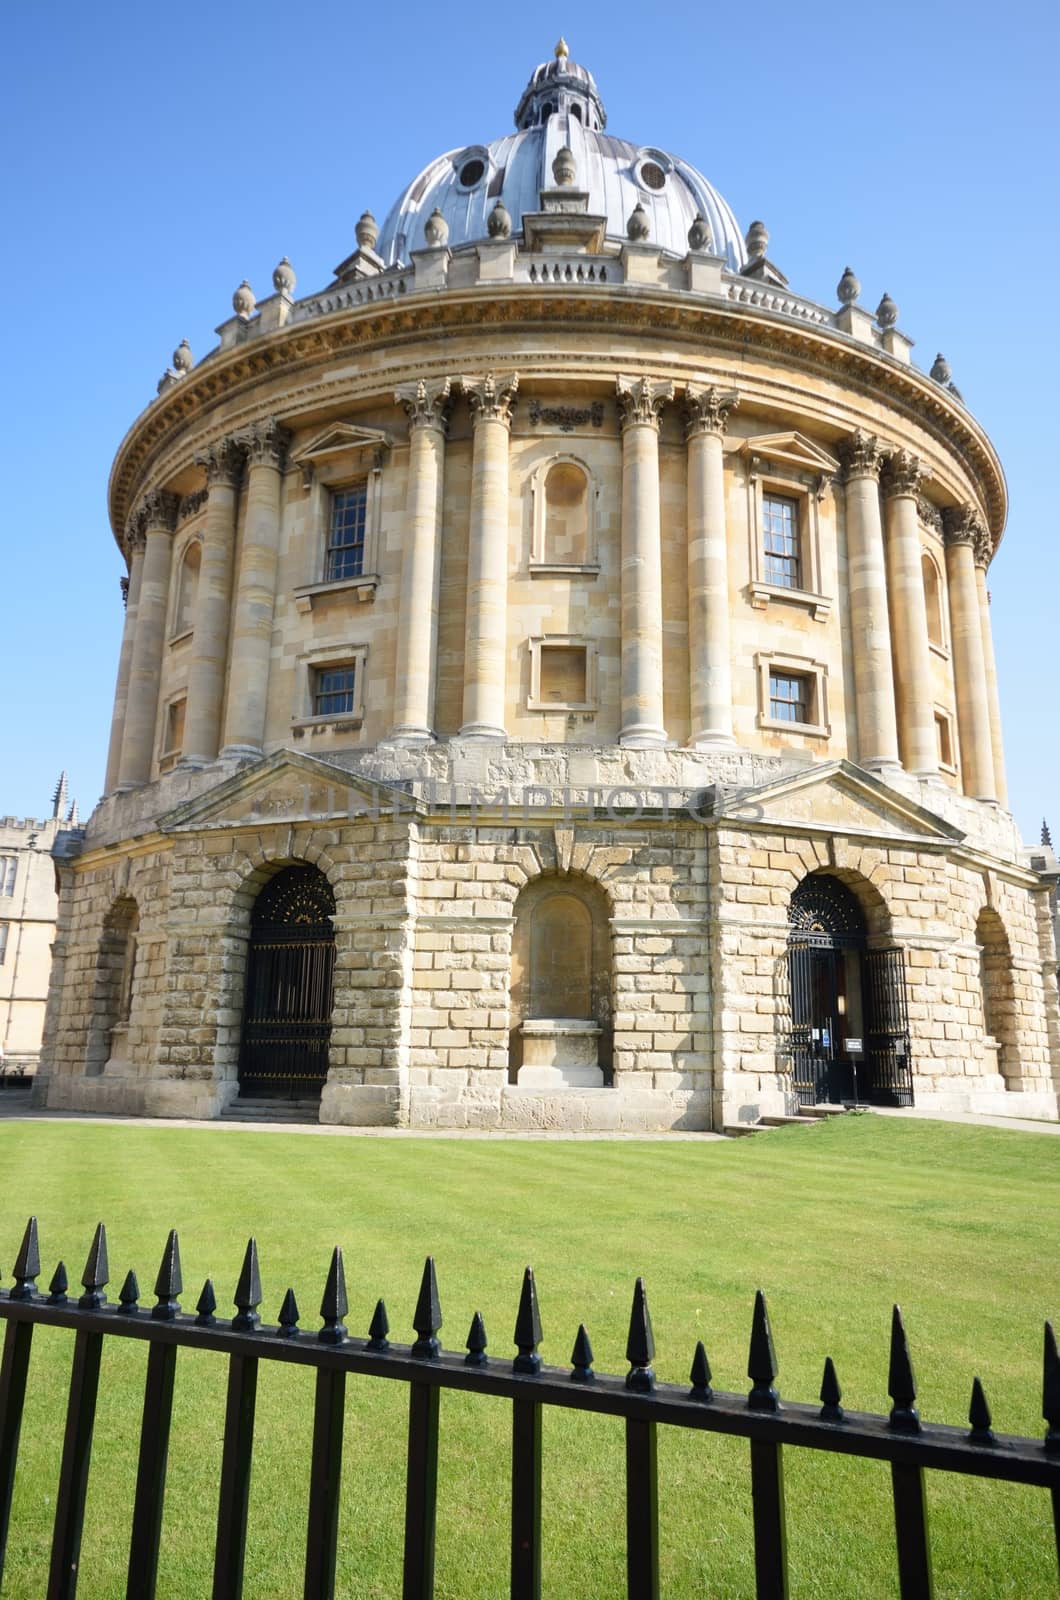 Radcliffe Camera with railings